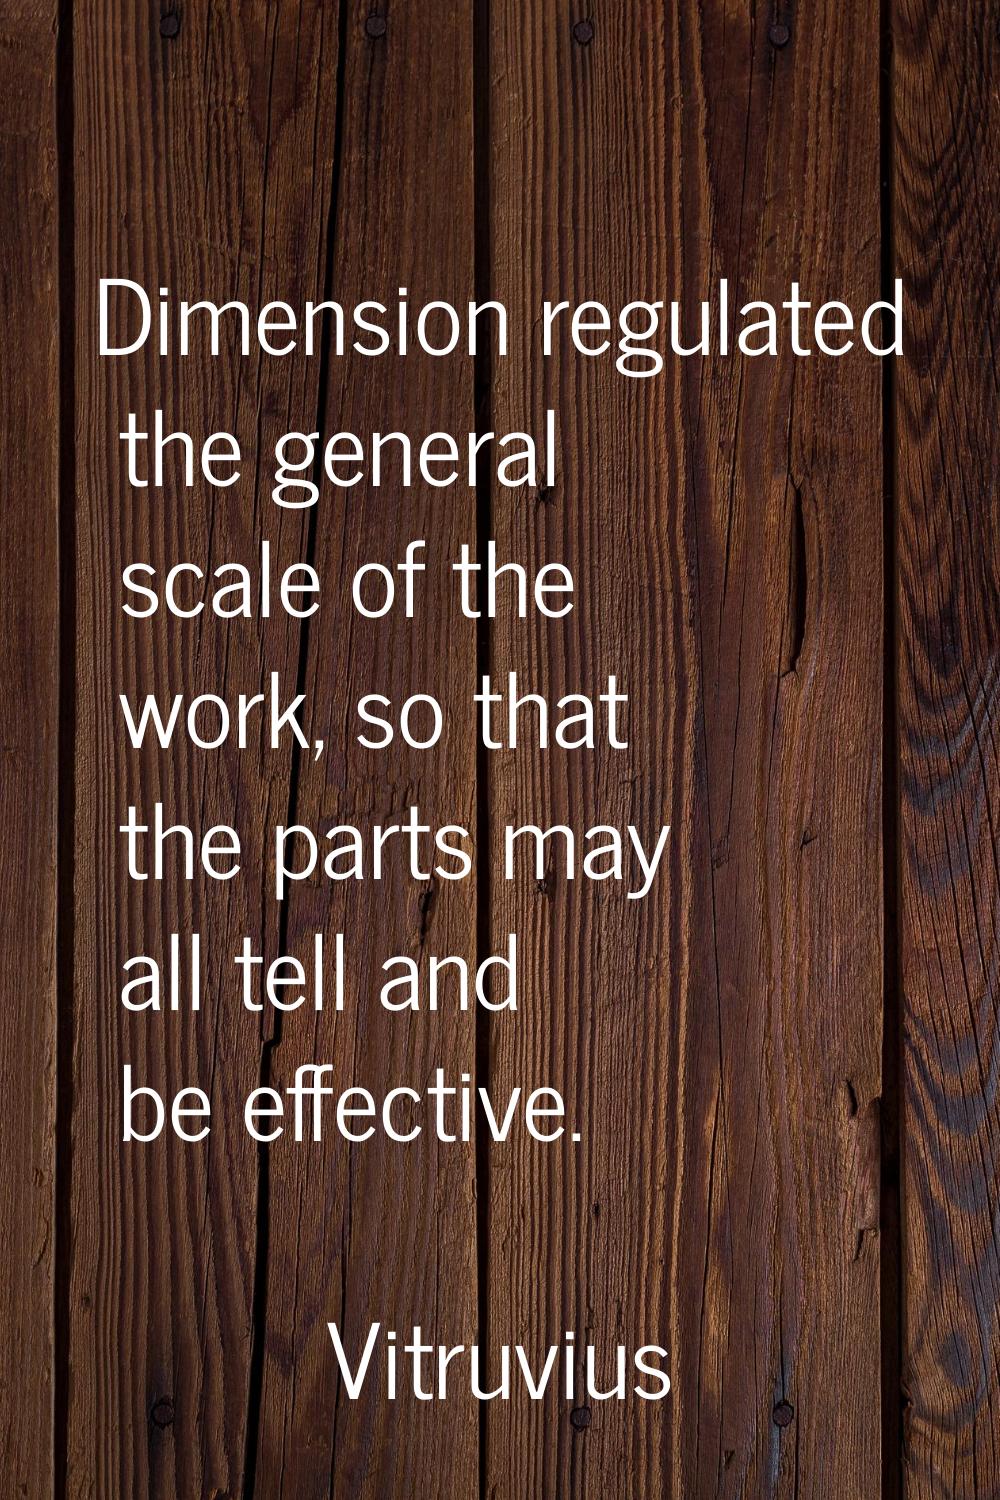 Dimension regulated the general scale of the work, so that the parts may all tell and be effective.